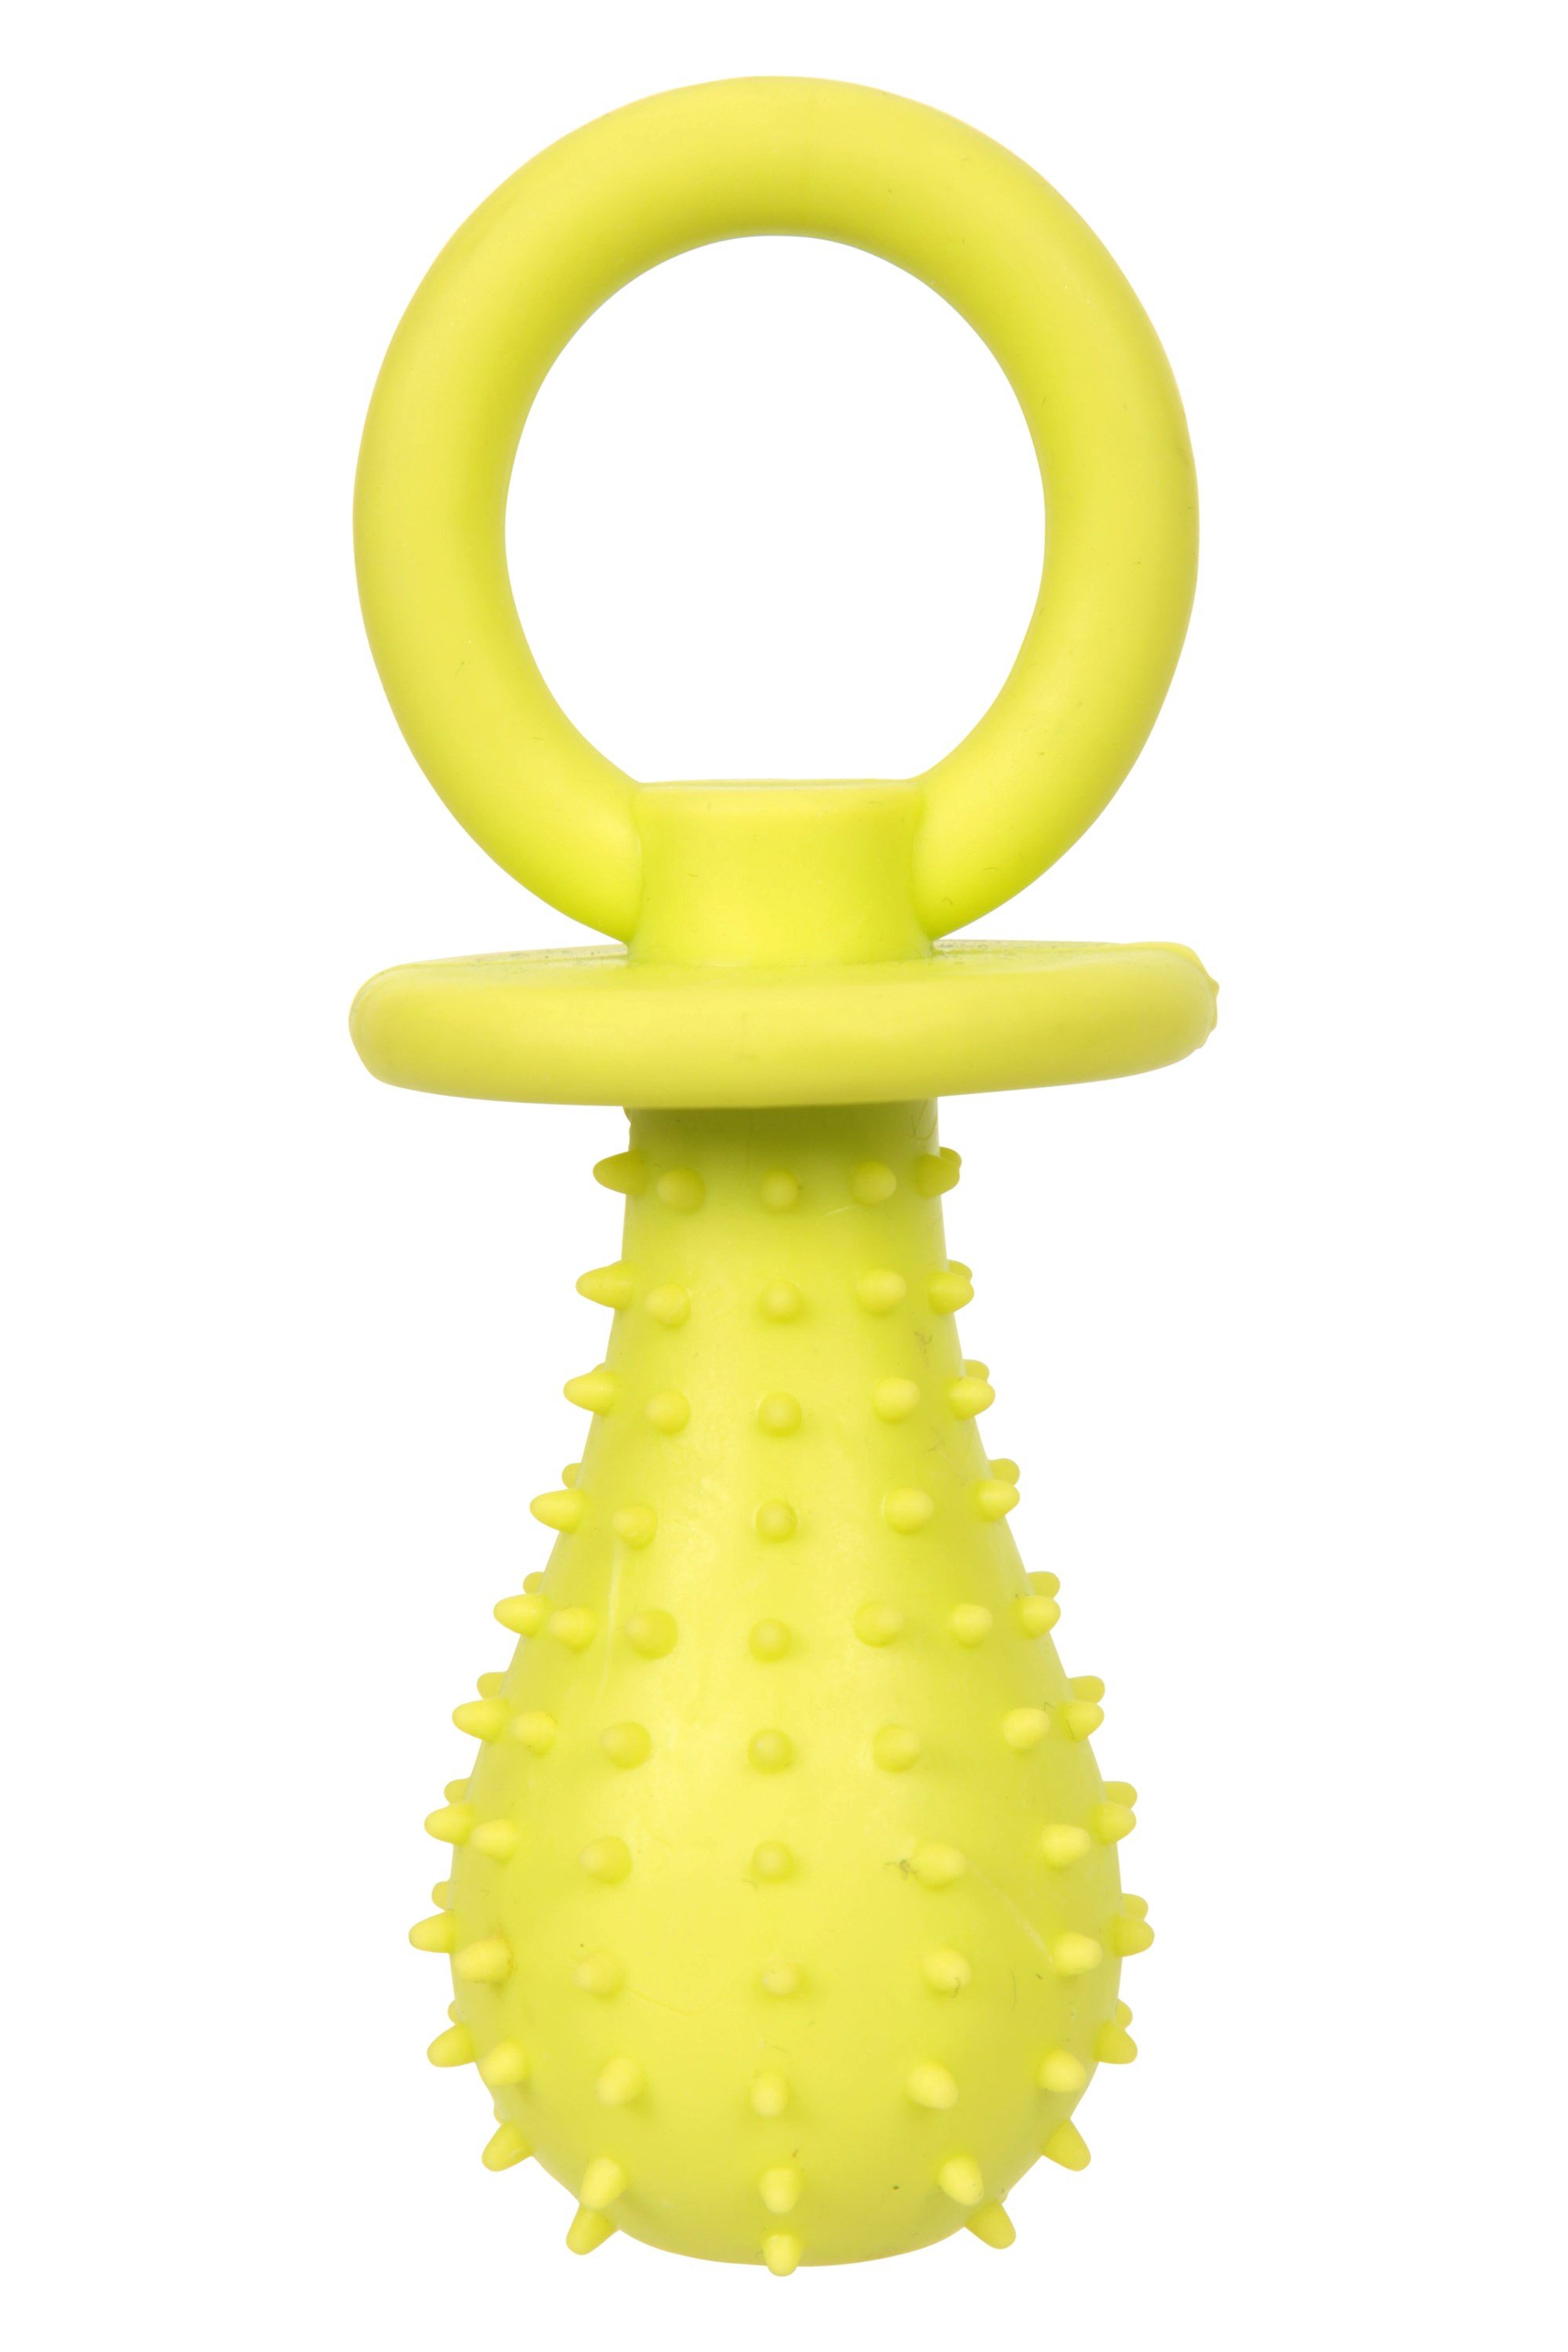 Puppy Pacifier Chew Toy - Yellow